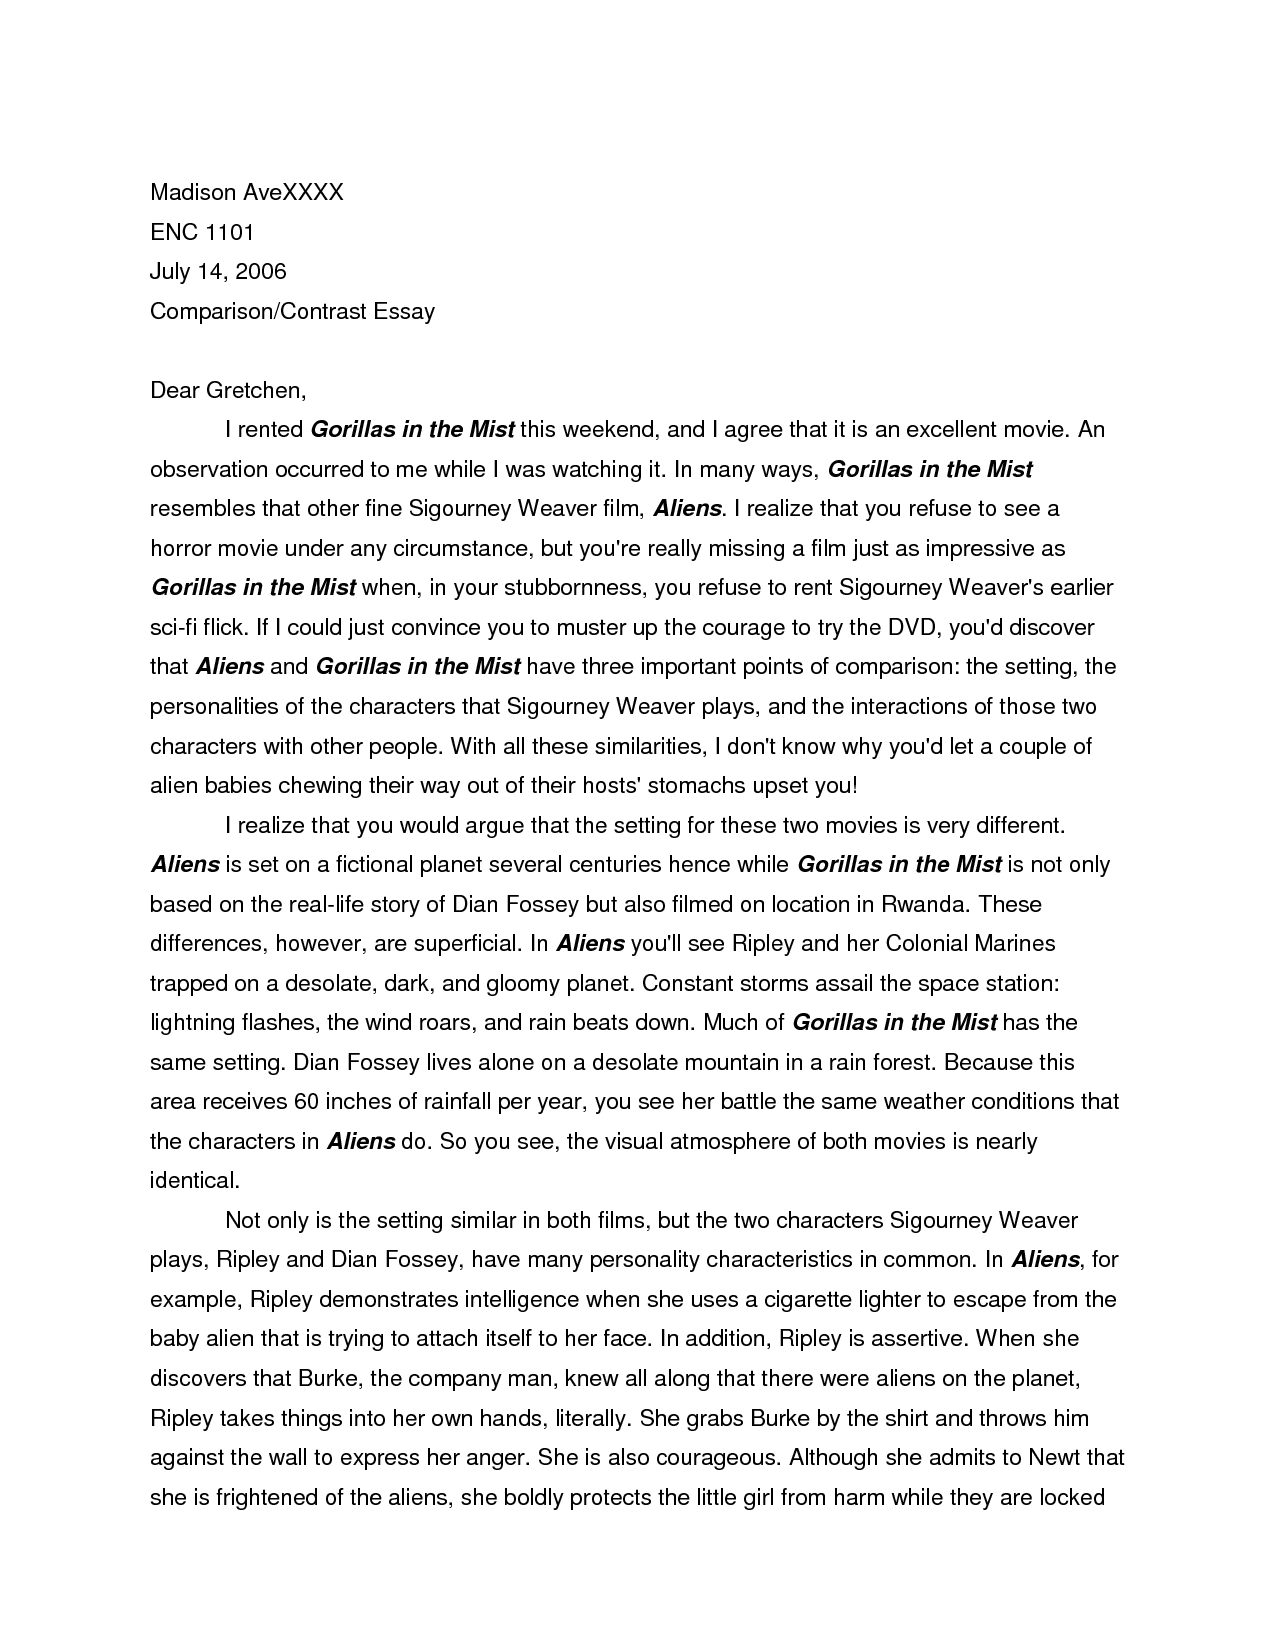 Writing an essay for college application compare and contrast